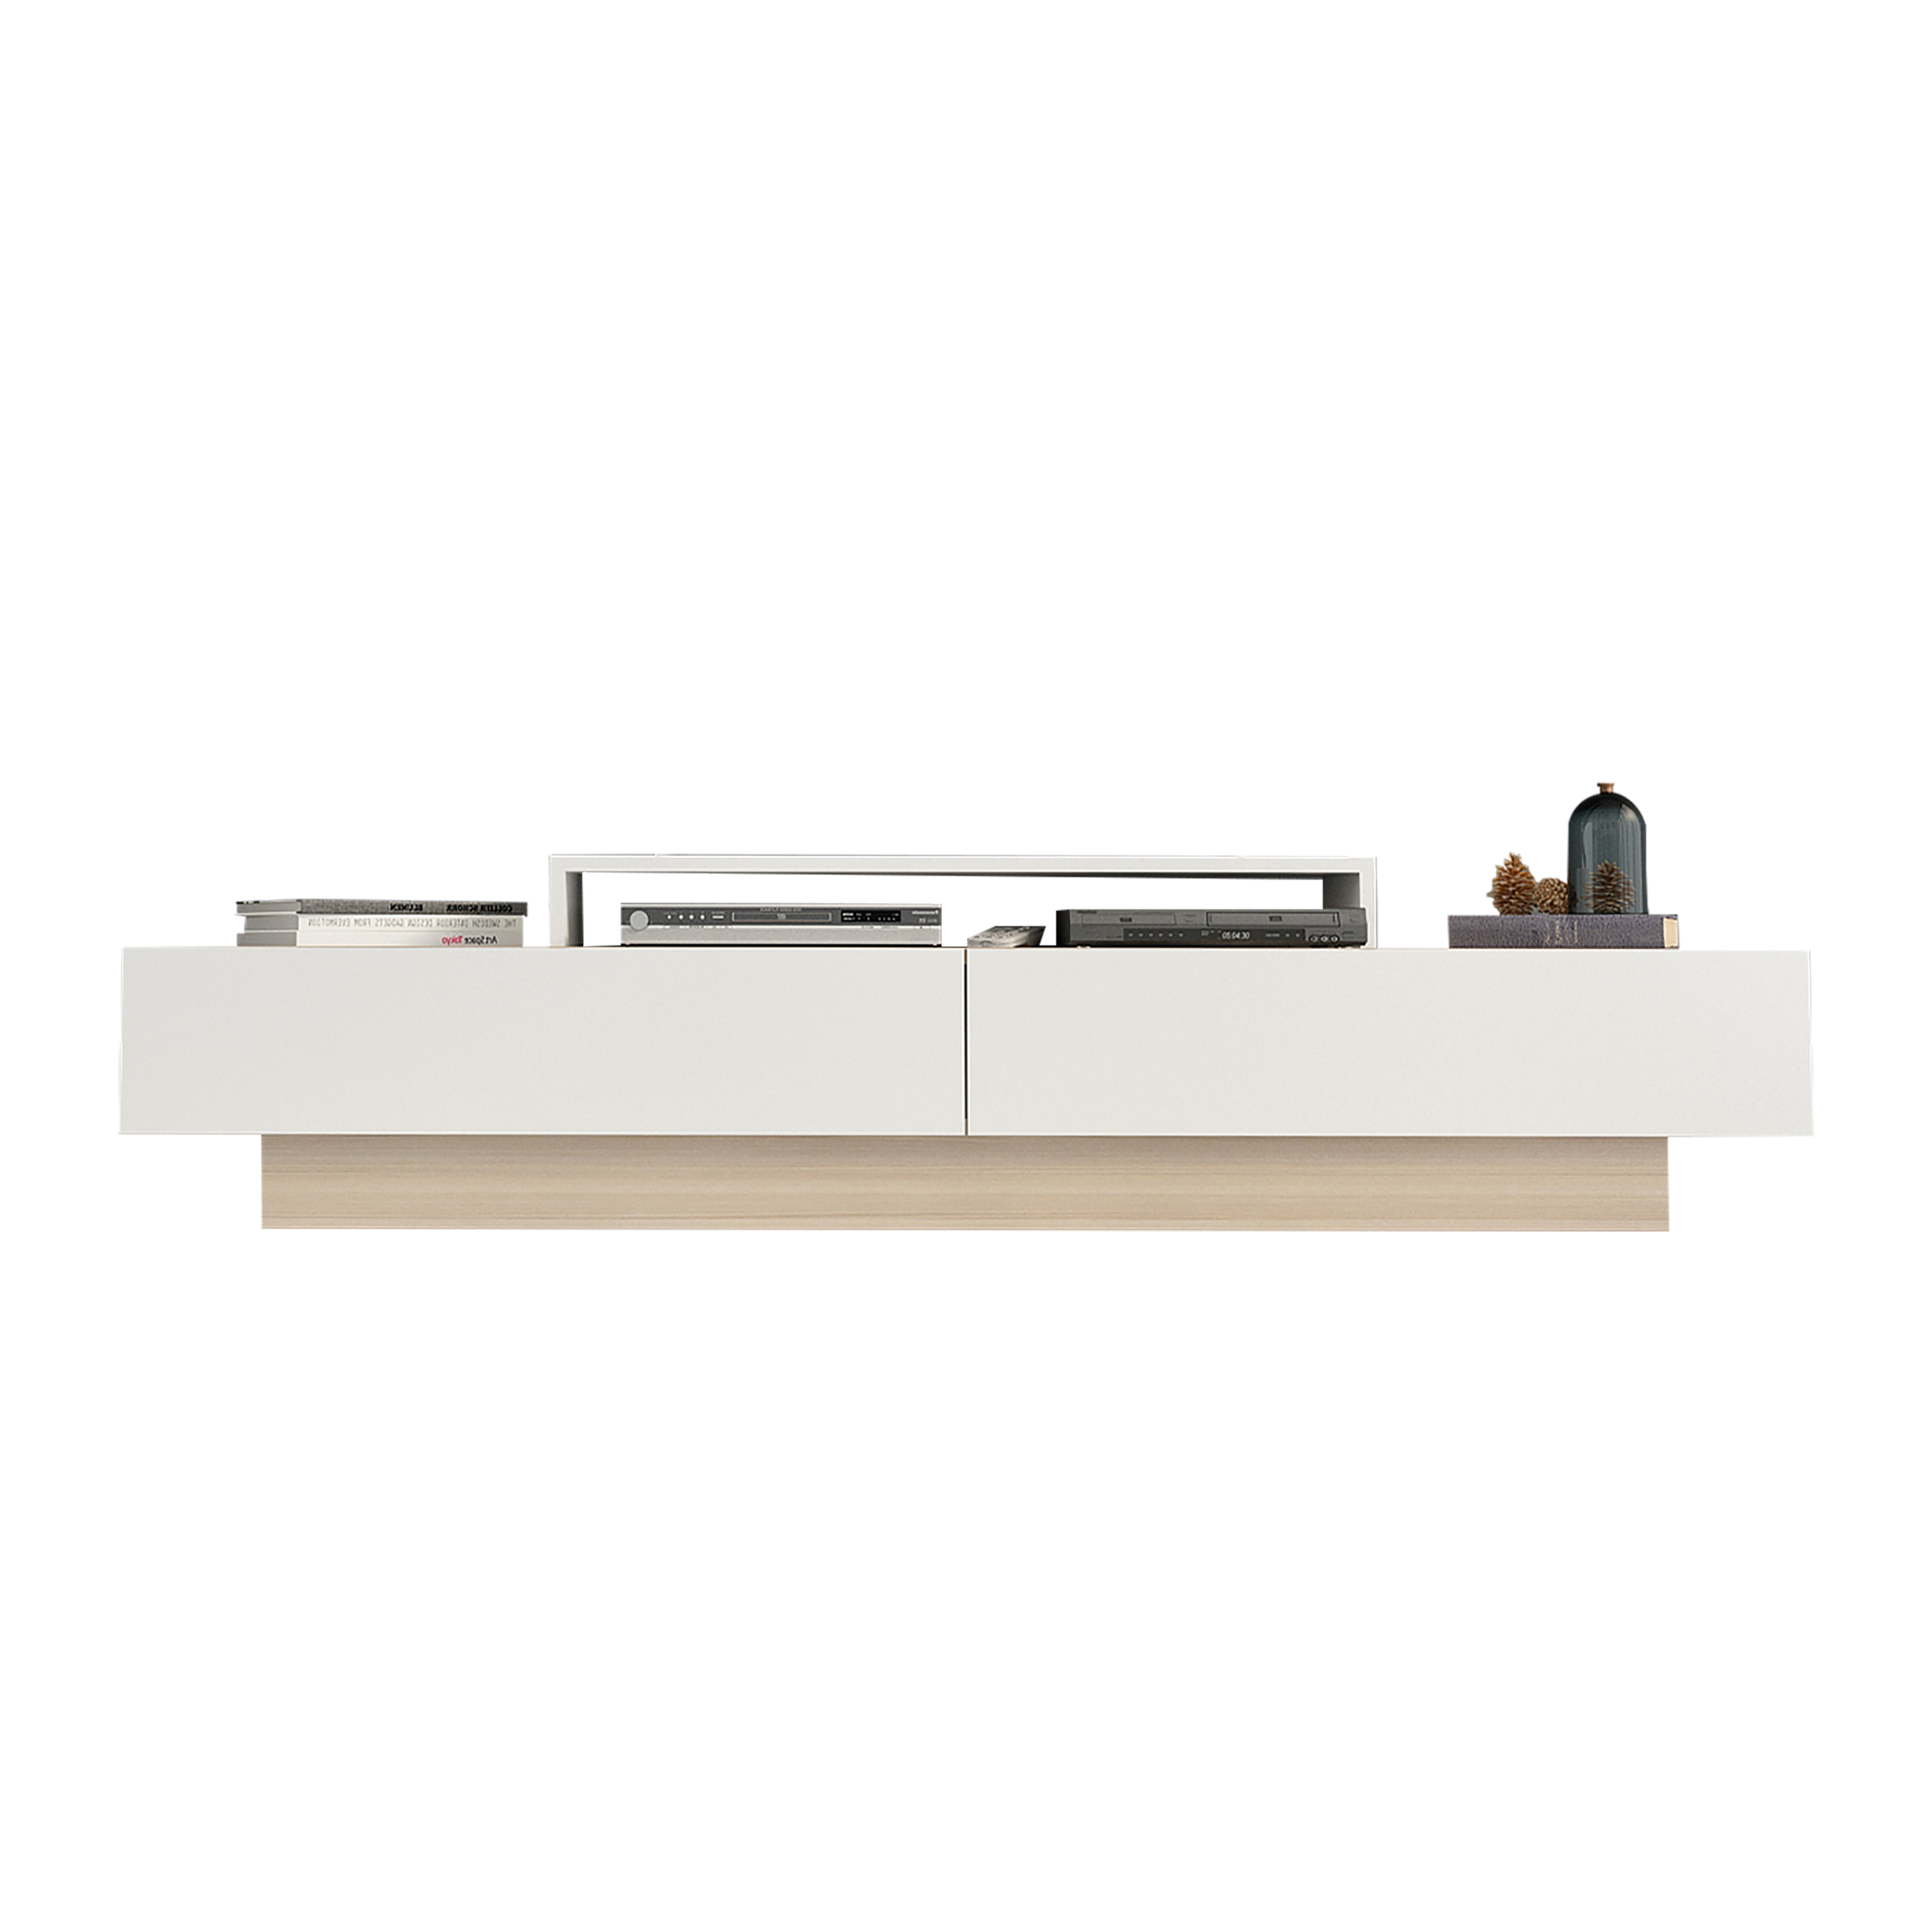 Decorotika Lusi 71'' Wide TV Stand & Media Console for TVs up to 80'' with Cabinets & Accent Wall Shelves - White & Cordoba